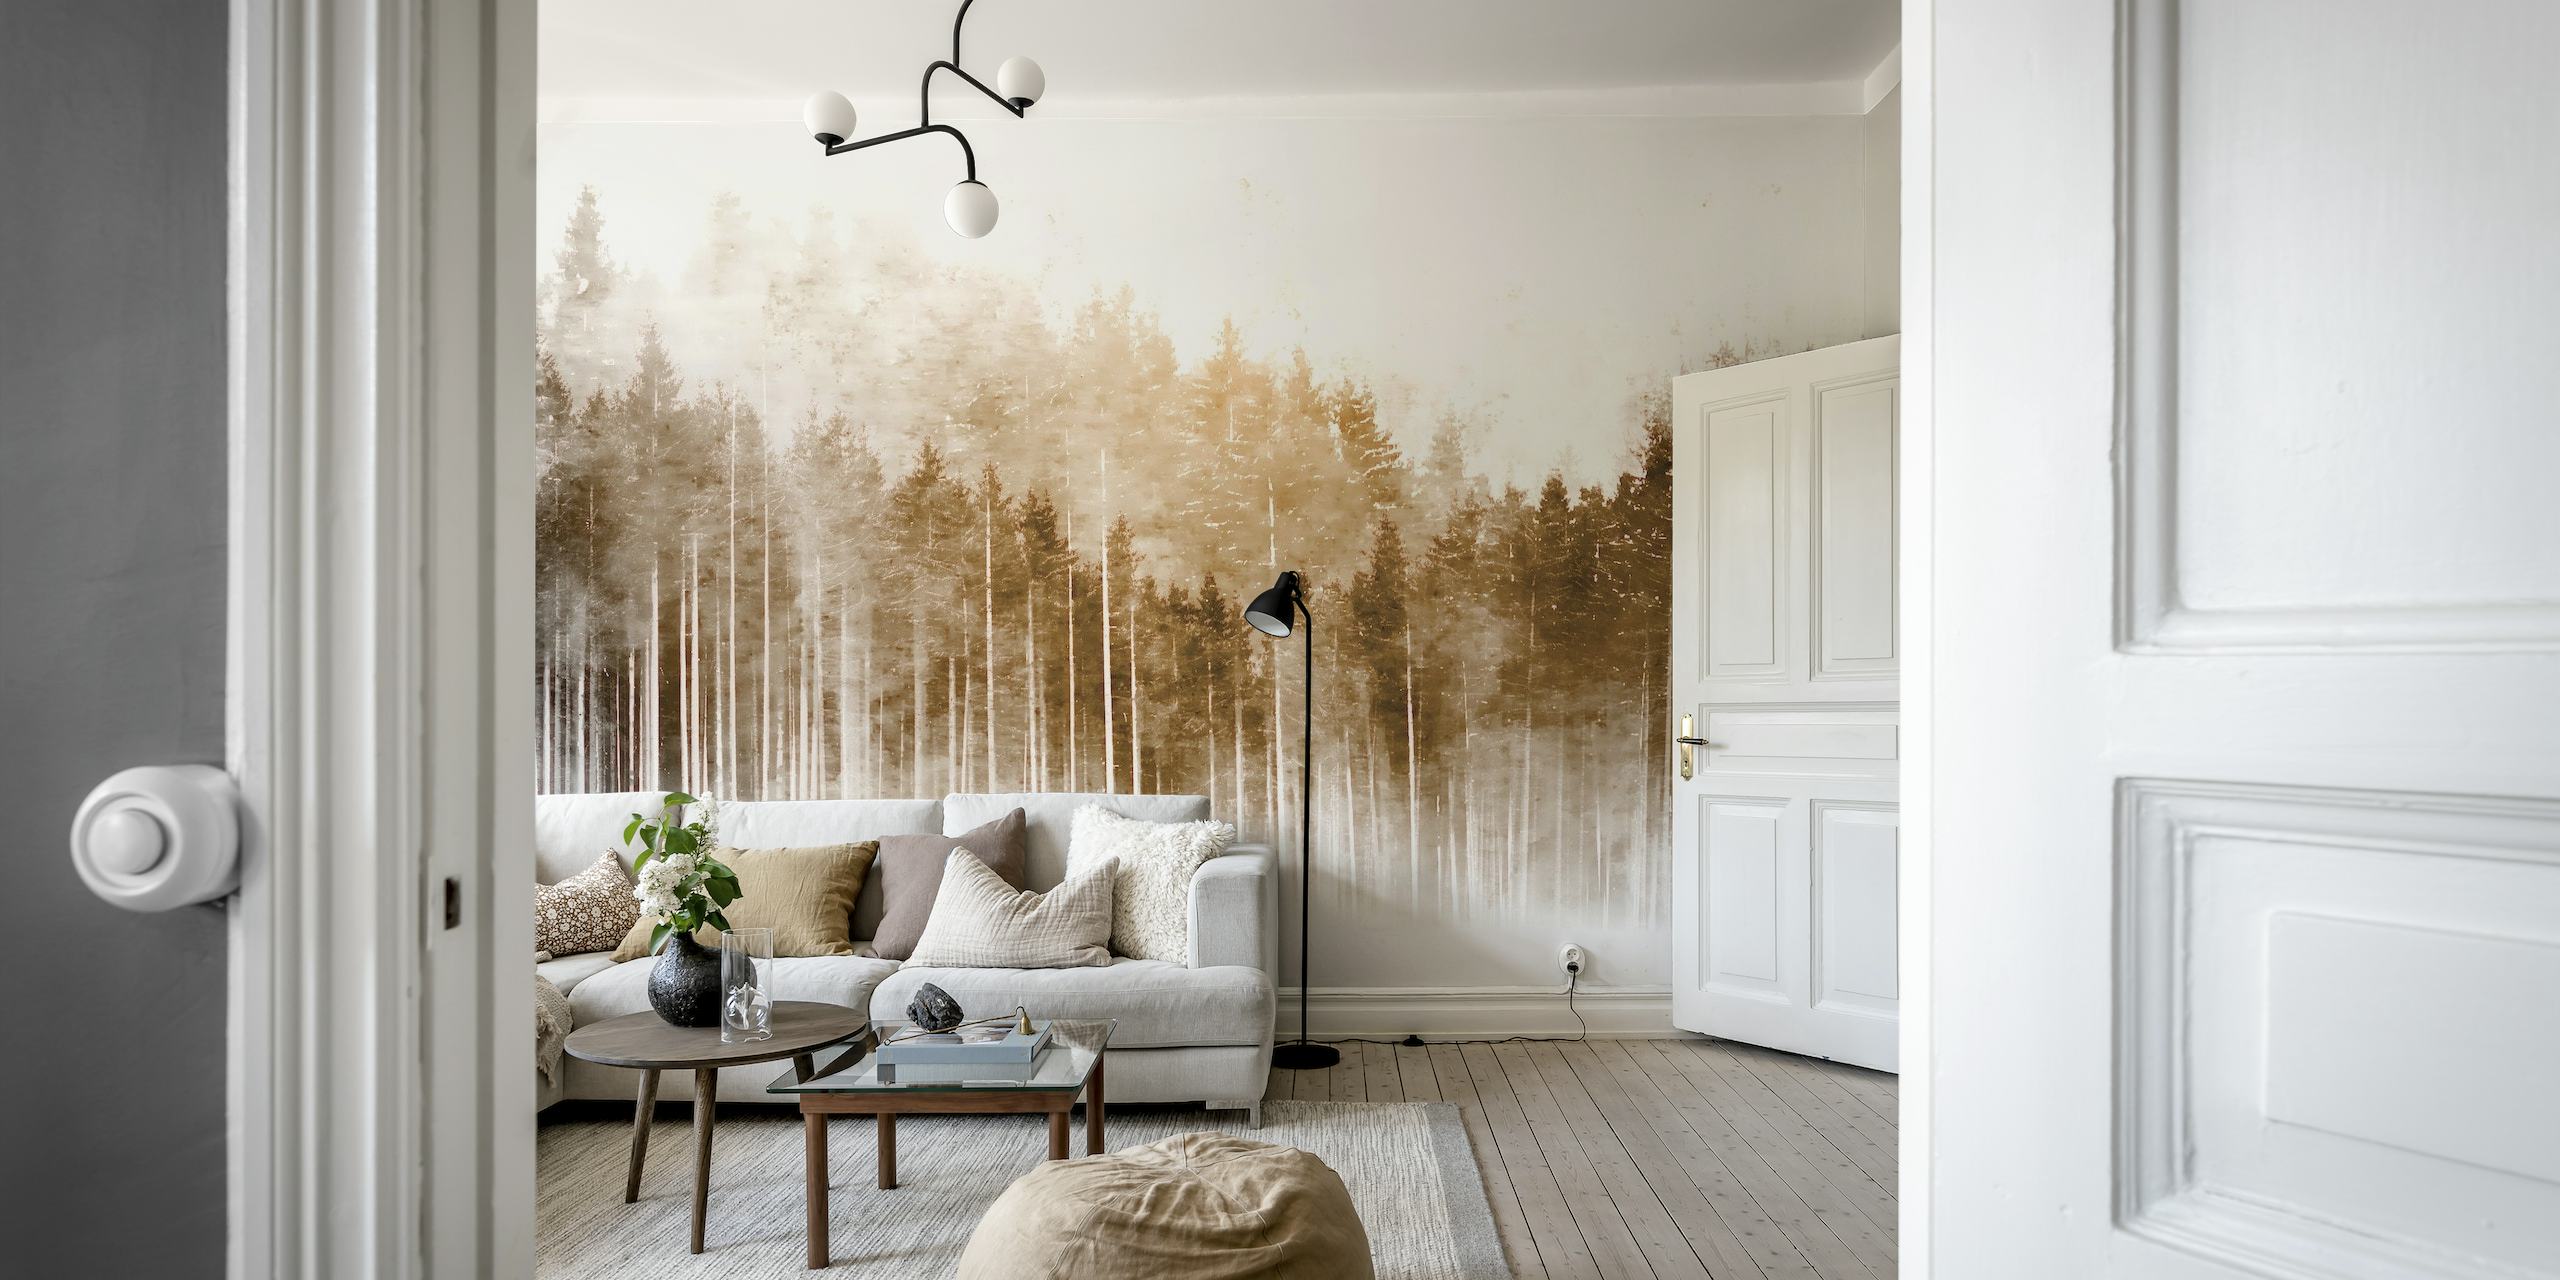 neutral-toned wall mural of misty pine forest creating a tranquil Japanese-inspired atmosphere